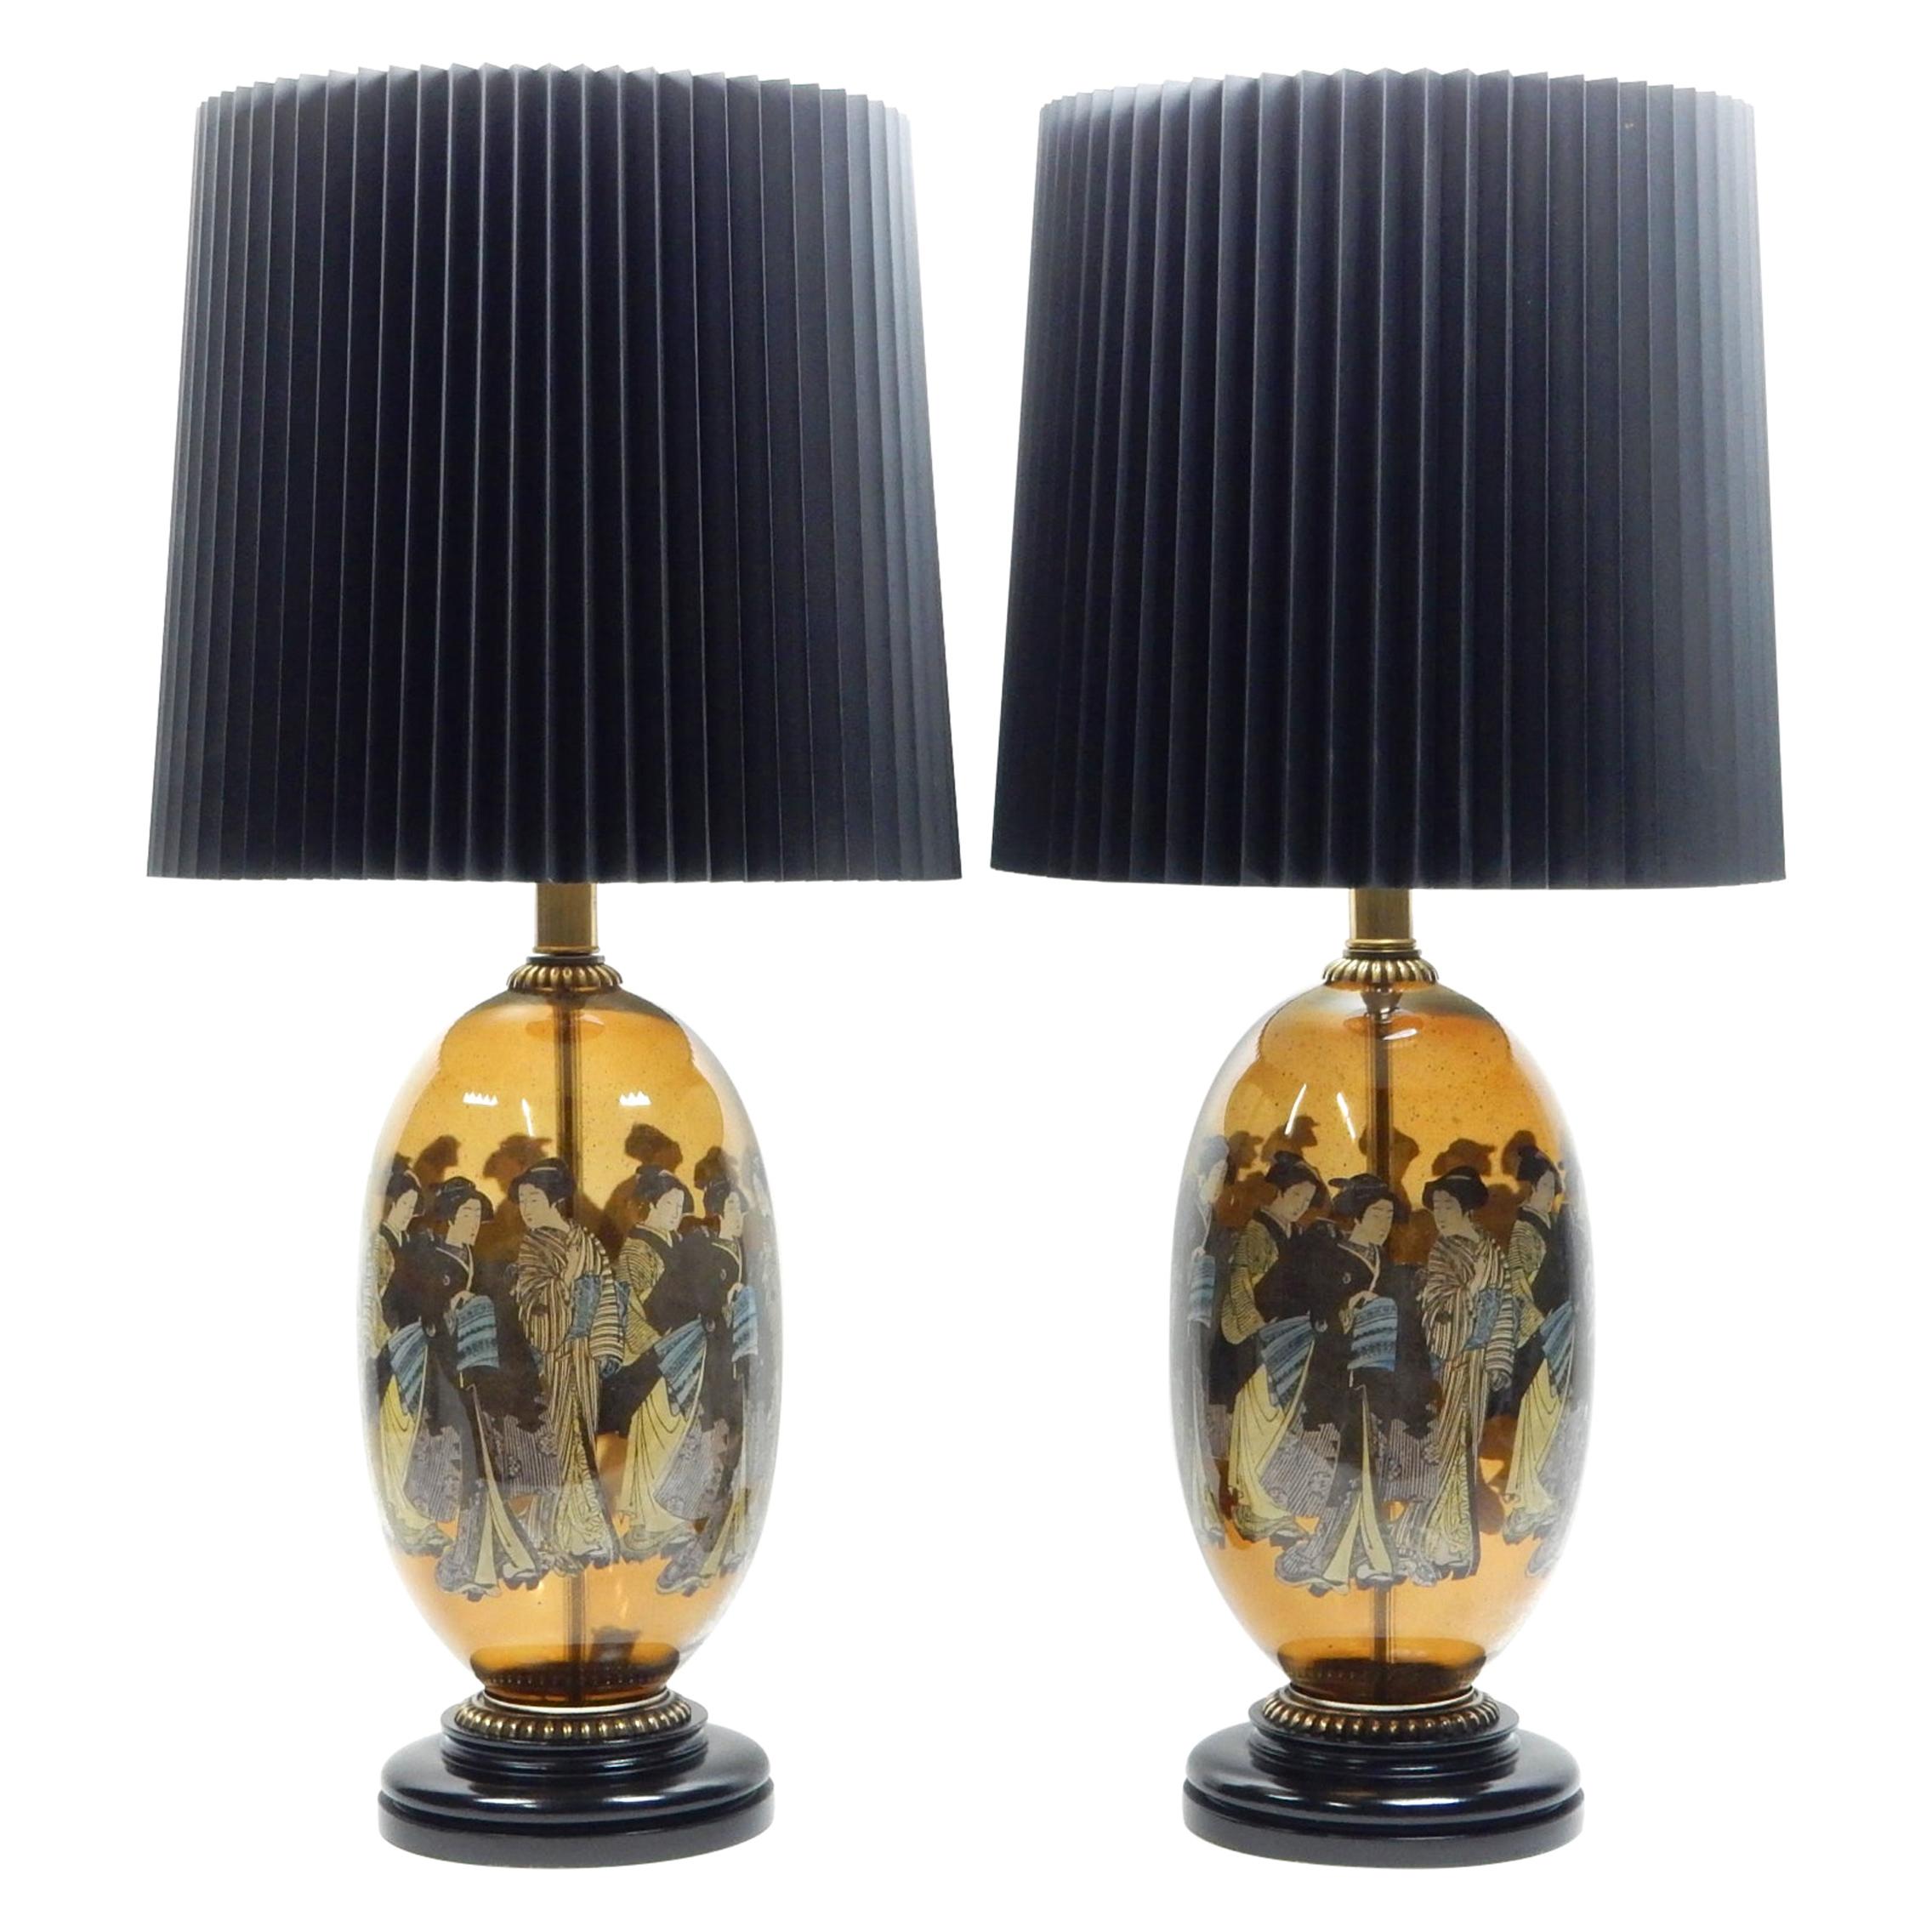 Gorgeous Pair of Mid-Century Chinoiserie Art Glass Lamps